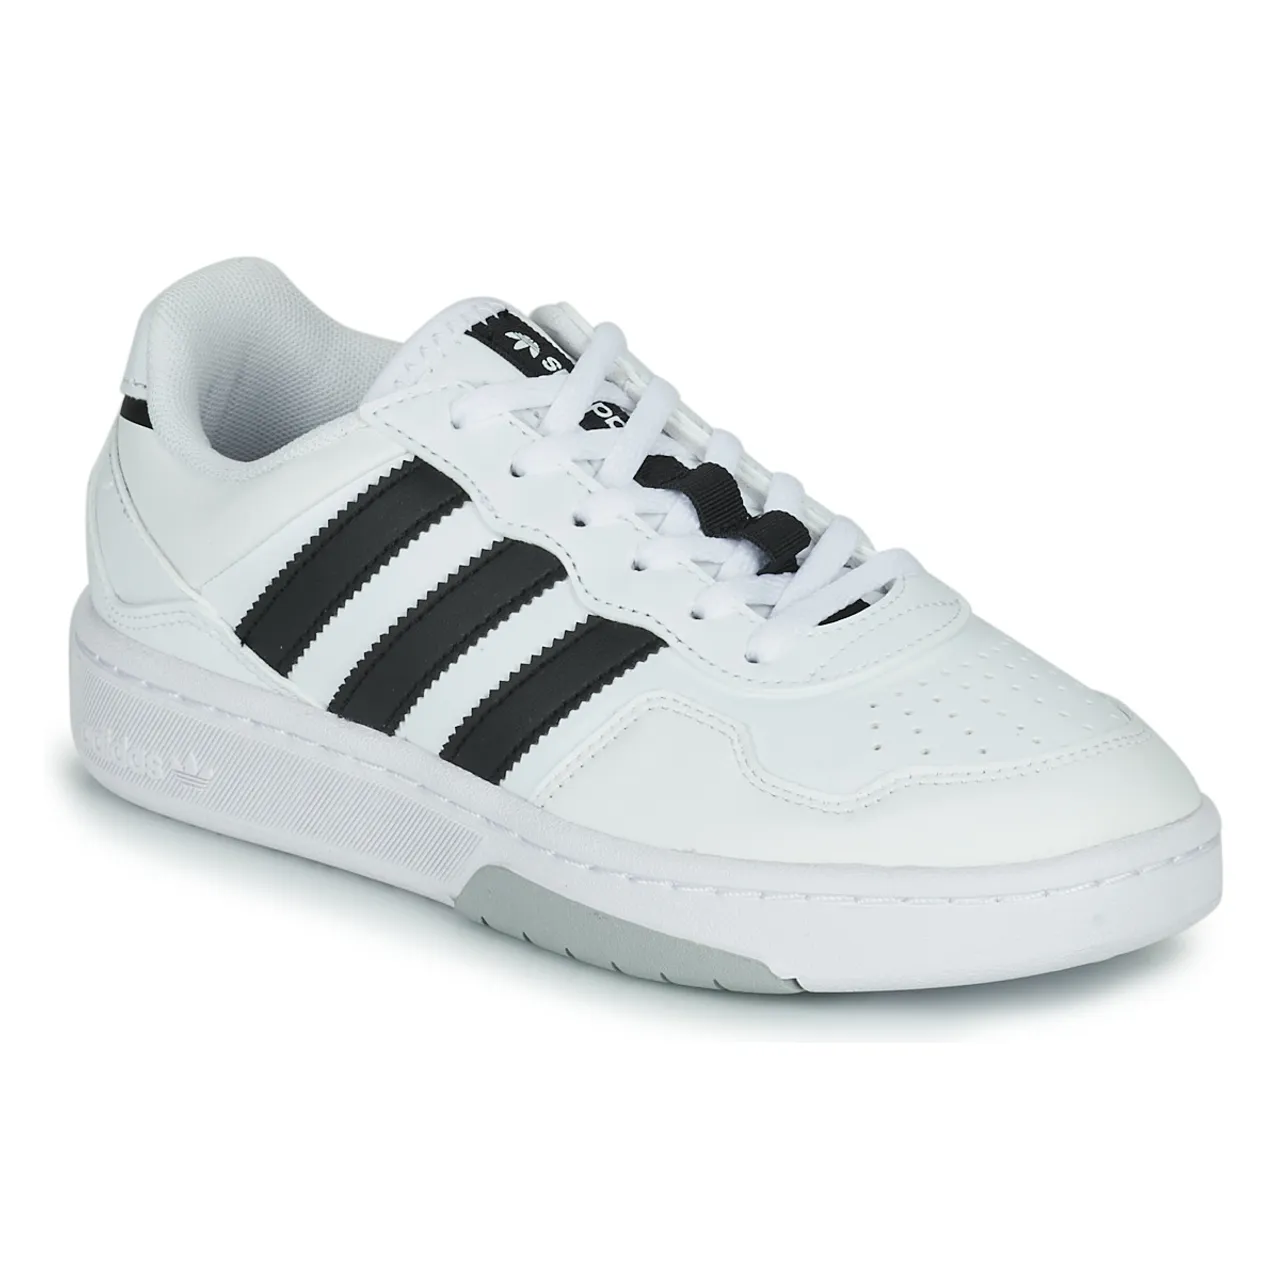 adidas  COURT REFIT J  boys's Children's Shoes (Trainers) in White